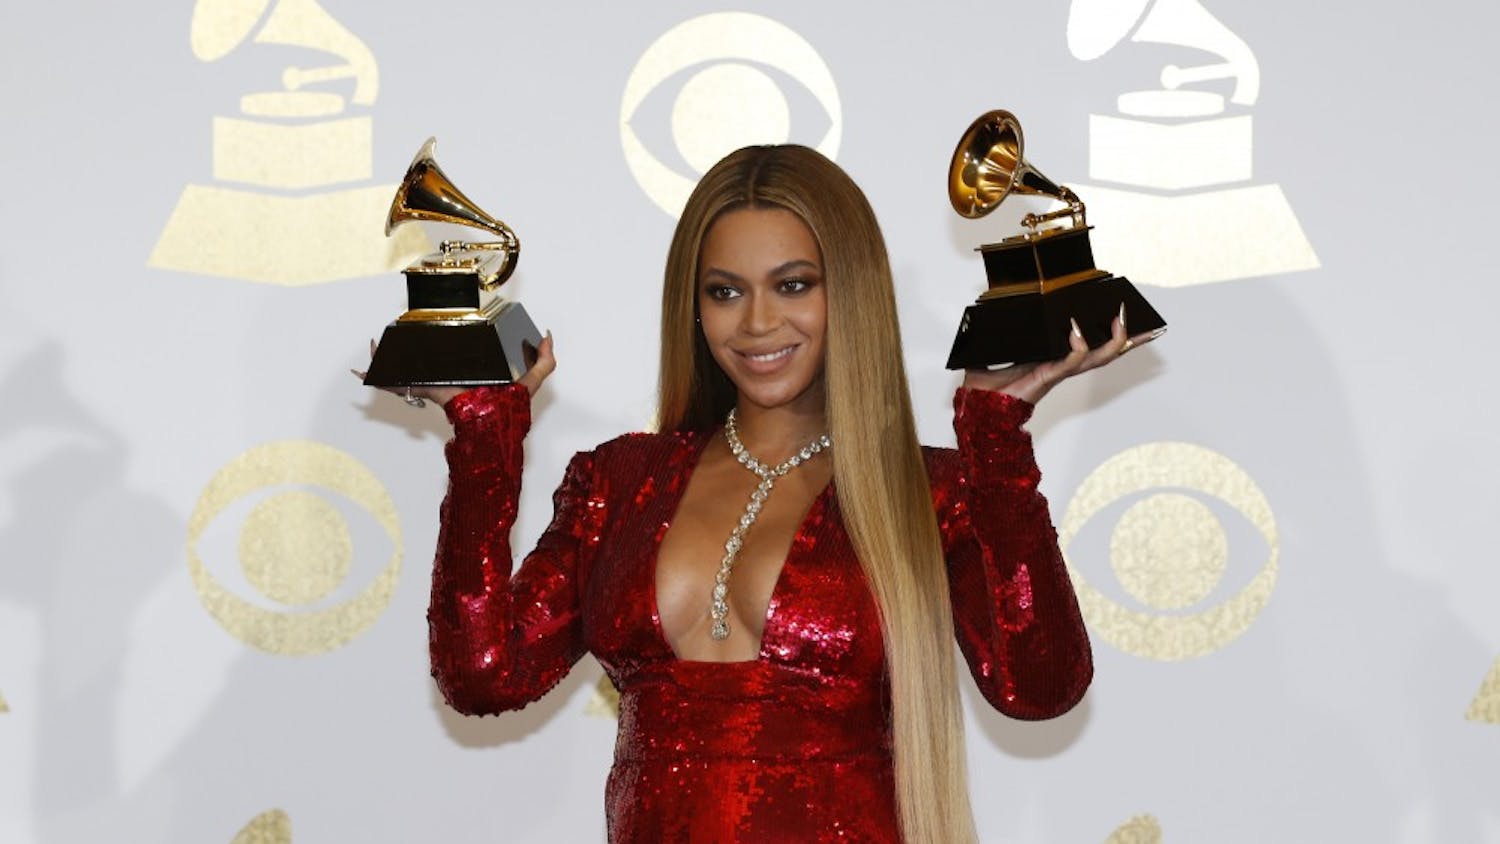 Beyonce backstage during the 59th Annual Grammy Awards at Staples Center in Los Angeles on Sunday, Feb. 12, 2017. (Allen J. Schaben/Los Angeles Times/TNS)